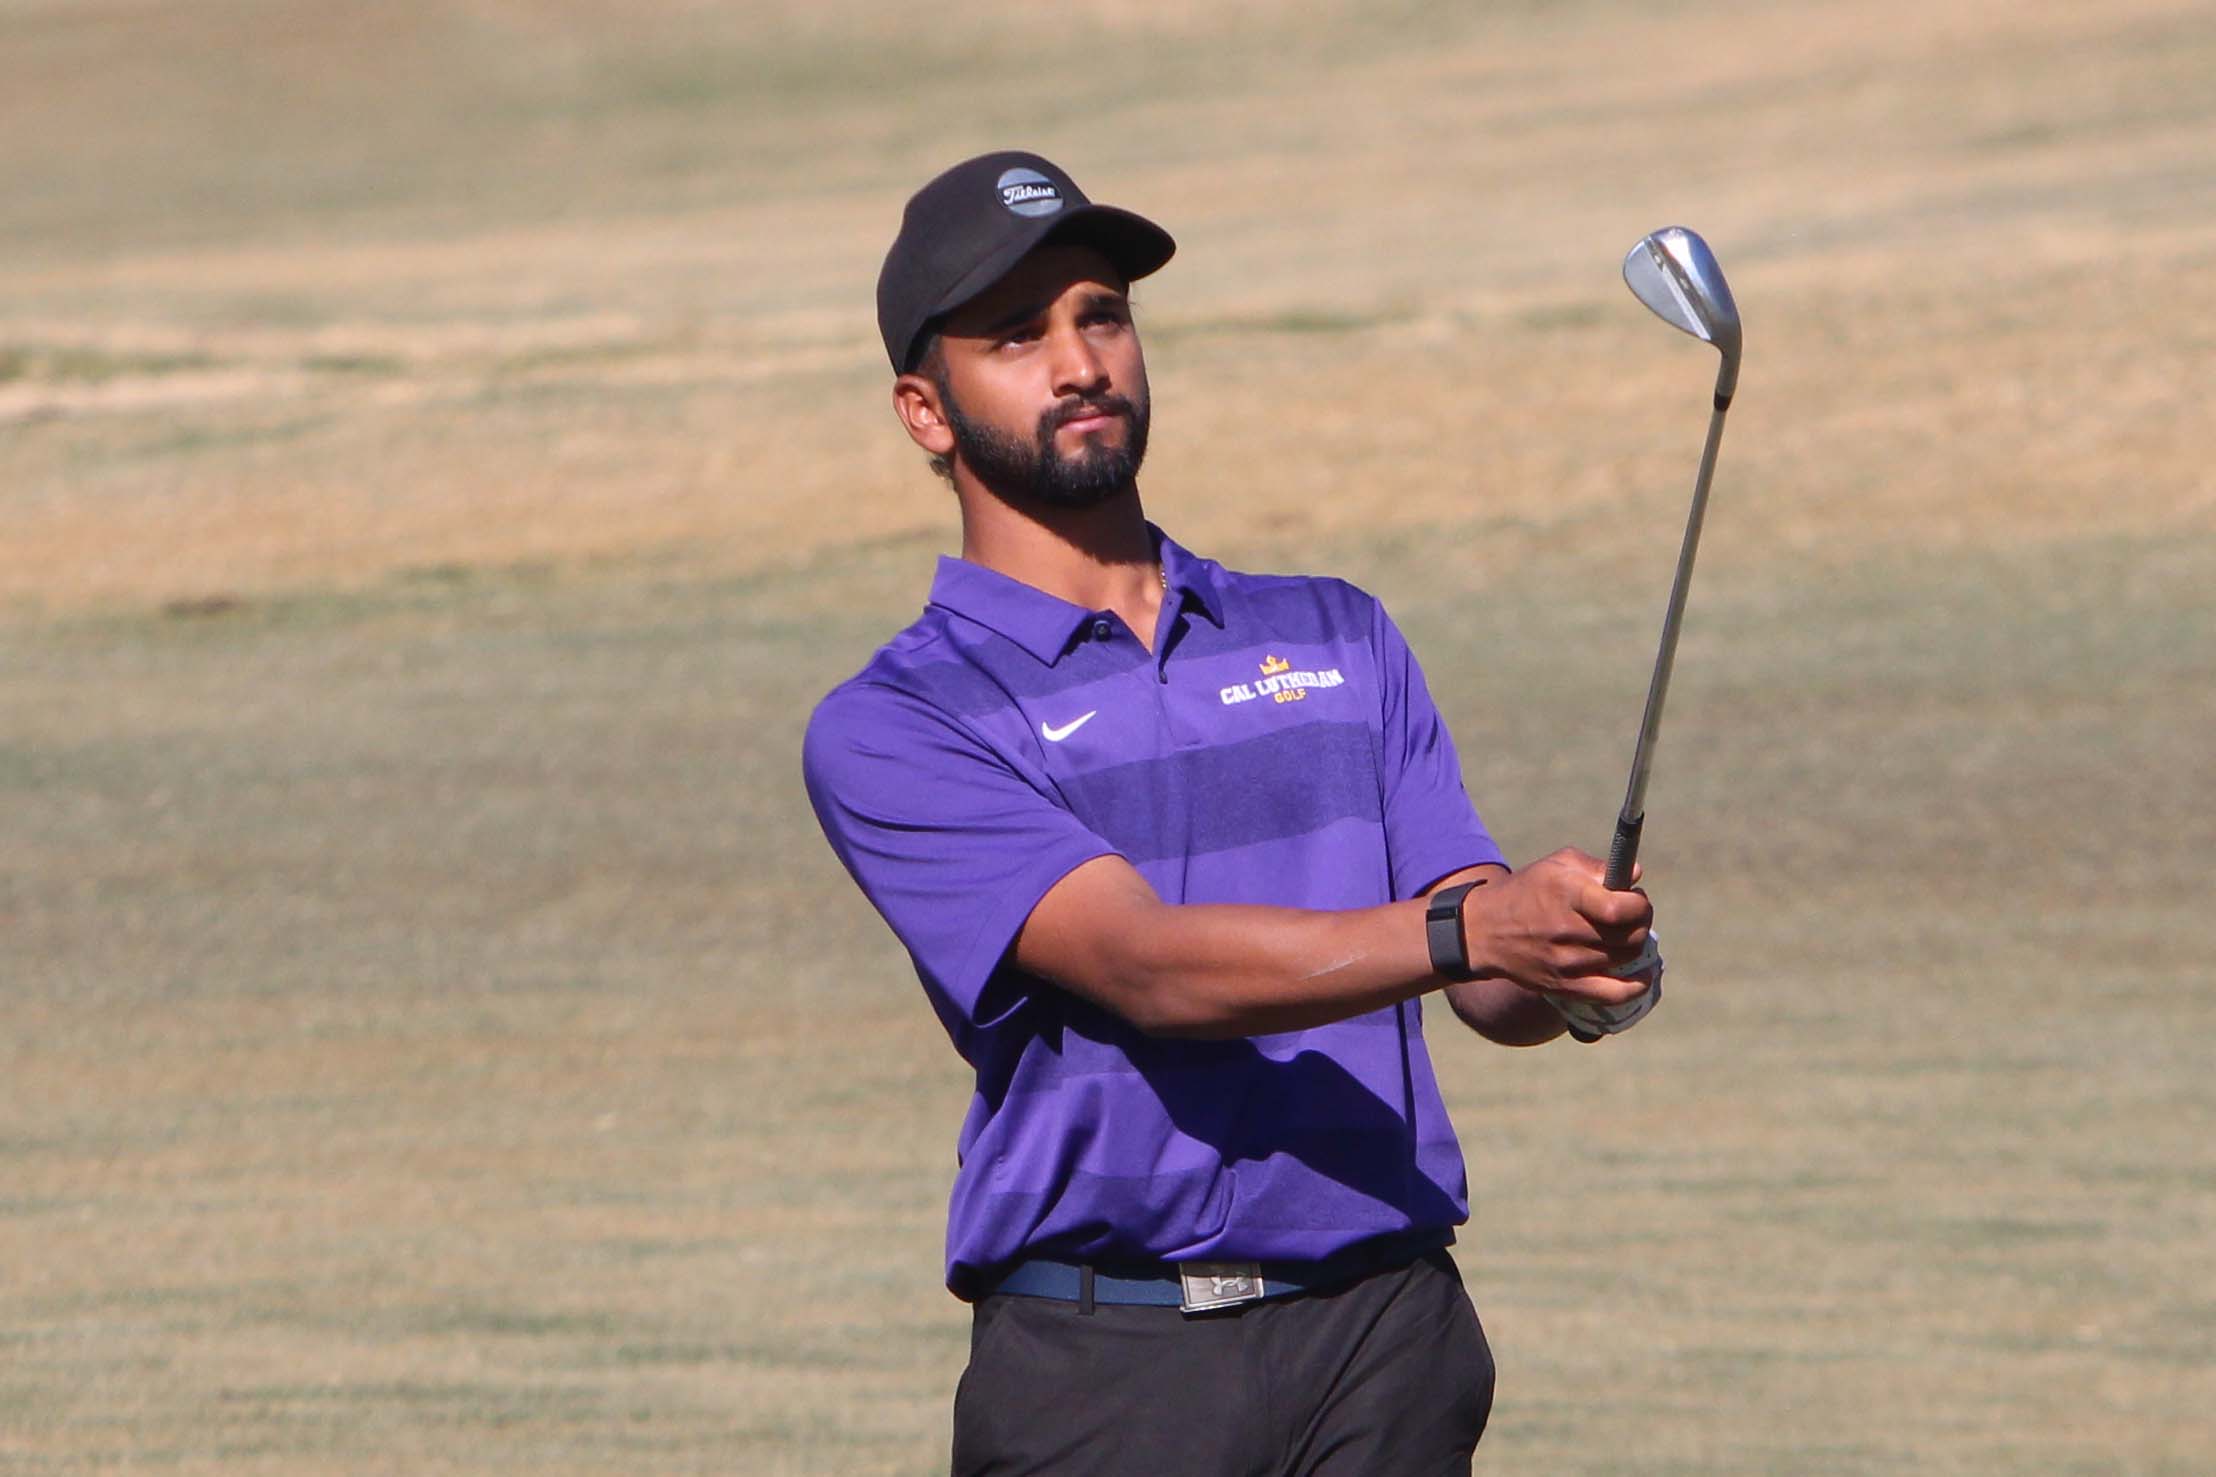 Singh Placed 19th, Kingsmen 15th at Wynlakes Intercollegiate